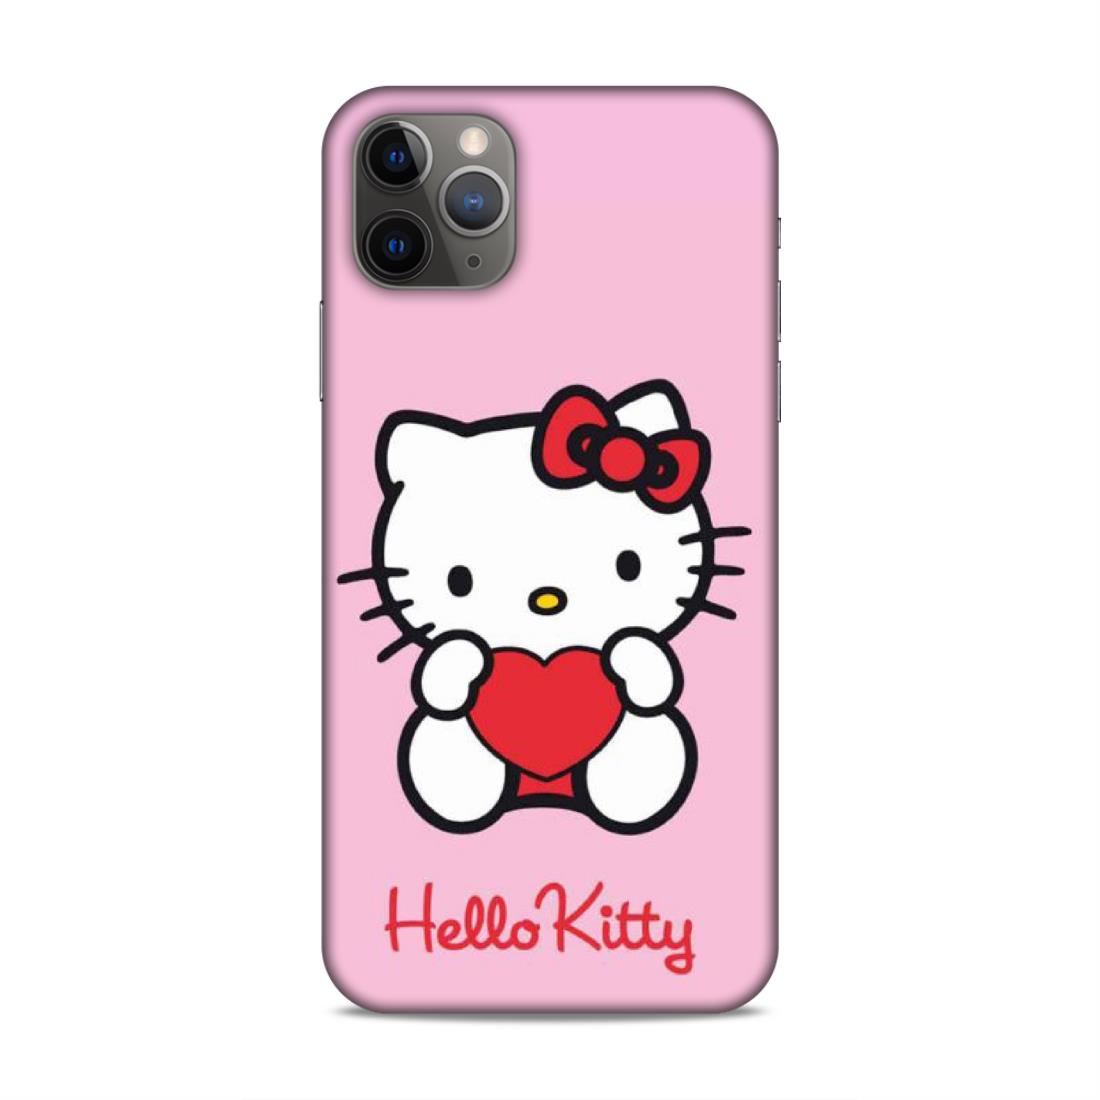 Hello Kitty in Pink Hard Back Case For Apple iPhone 11 Pro Max